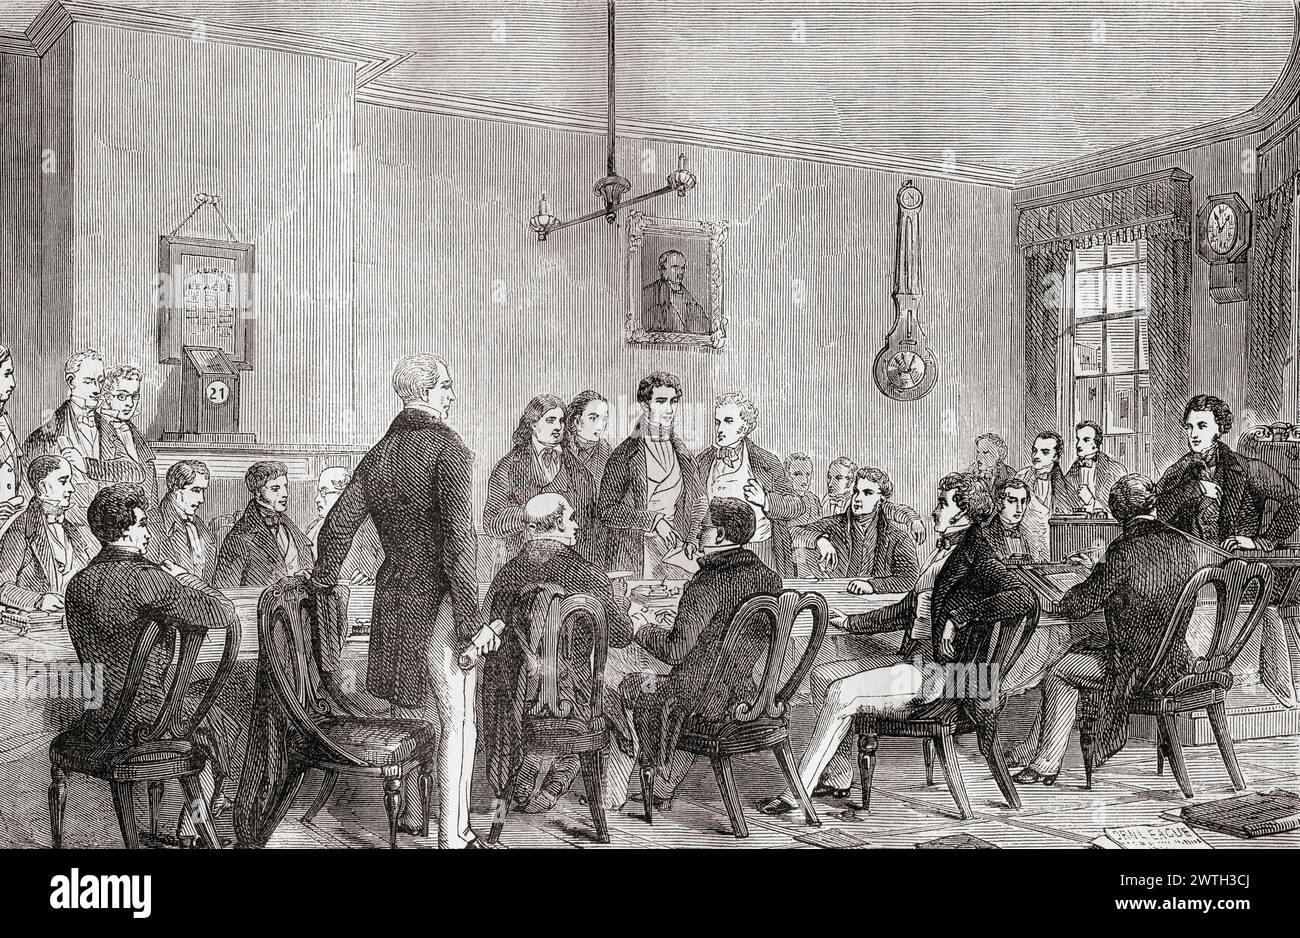 Meeting of the Anti-Corn Law League in Newall's Buildings, Manchester, 19th century.  The Corn Laws  were taxes on imported grain introduced in 1815, the League was responsible for turning public and elite opinion against the laws.  From Cassell's Illustrated History of England. Stock Photo